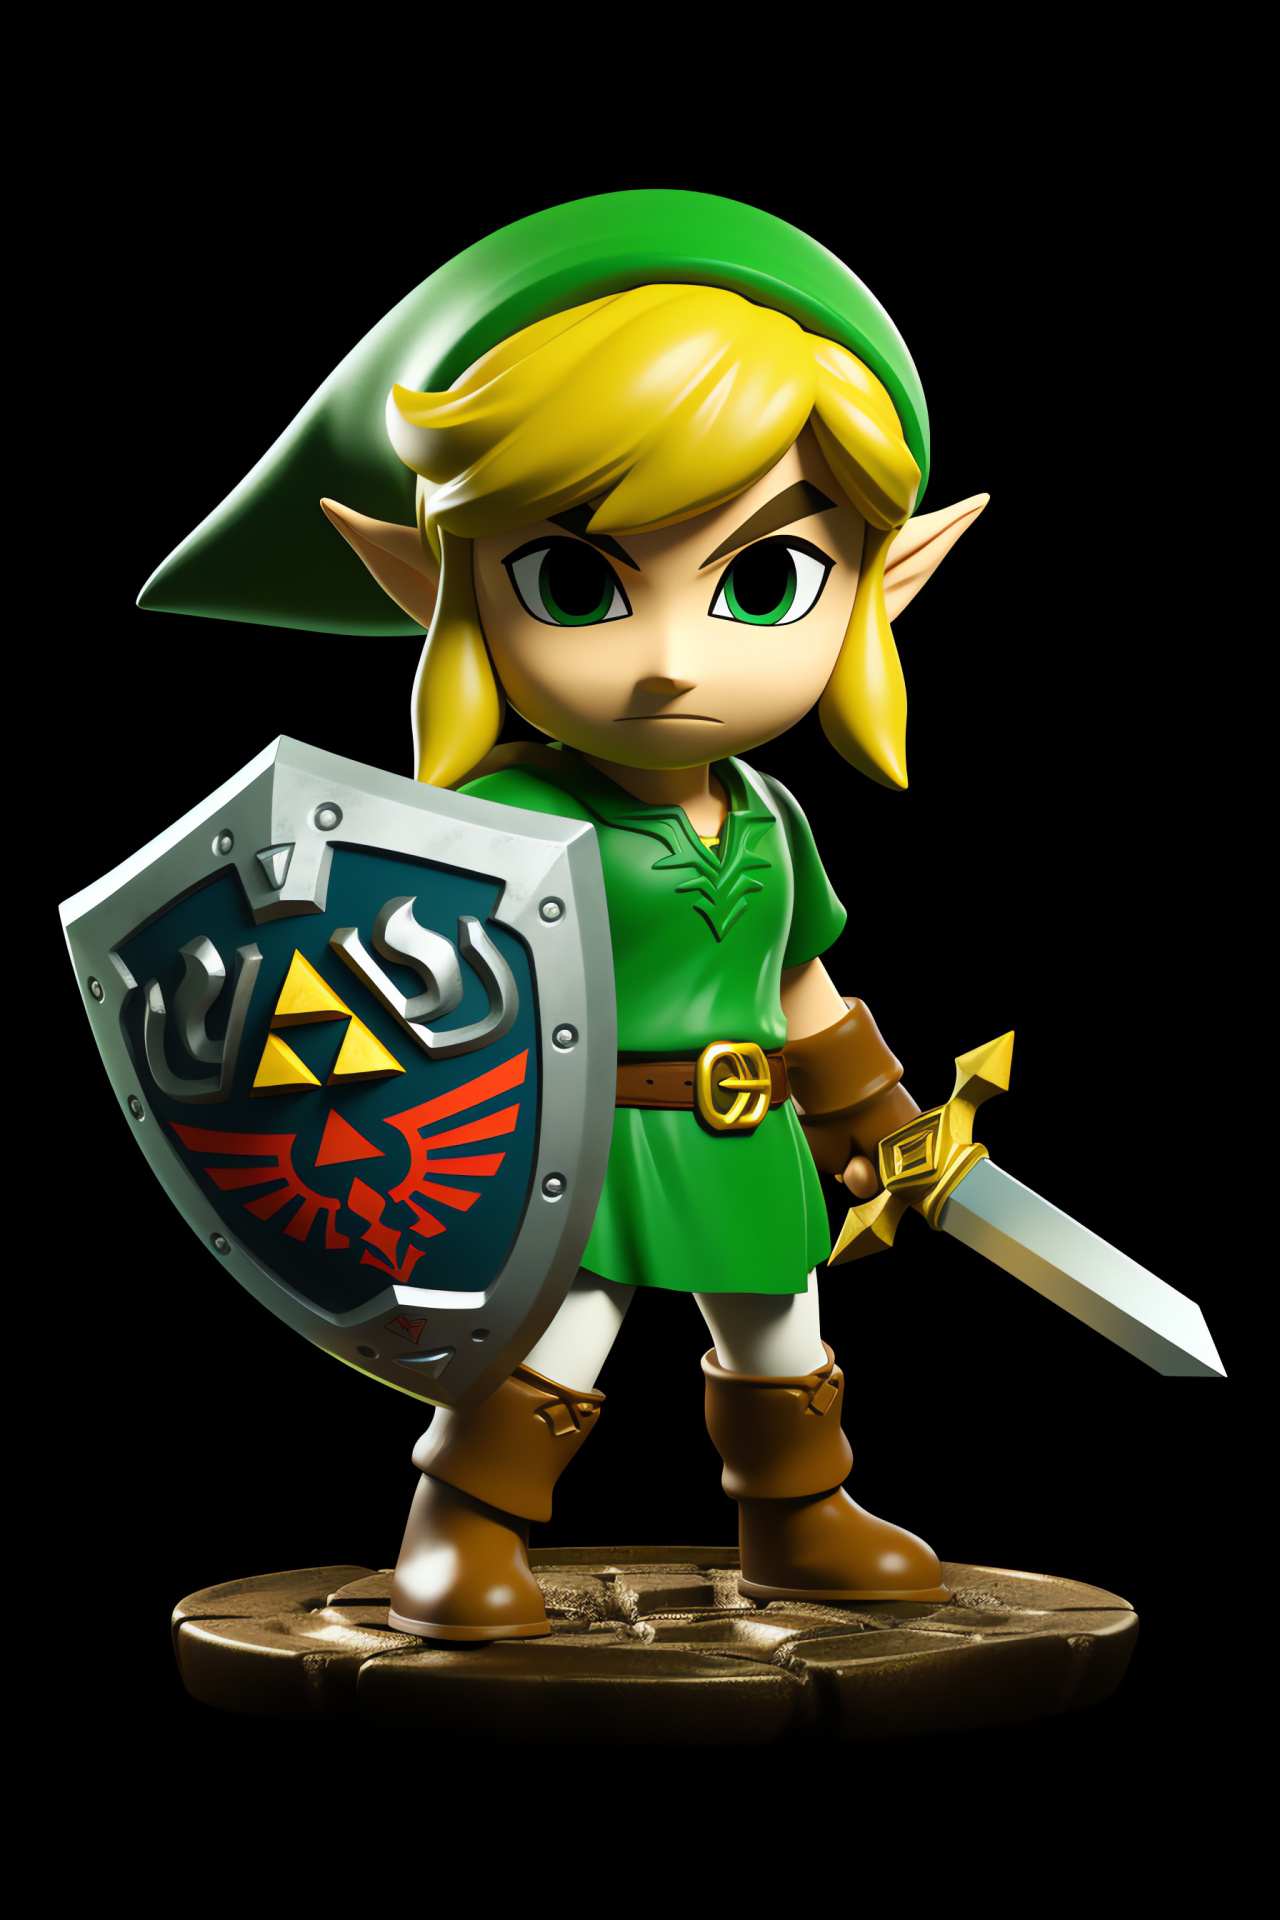 Toon Link Wind Waker, Charming game protagonist, Deep azure glance, Defensive armament, Iconic style, HD Phone Image